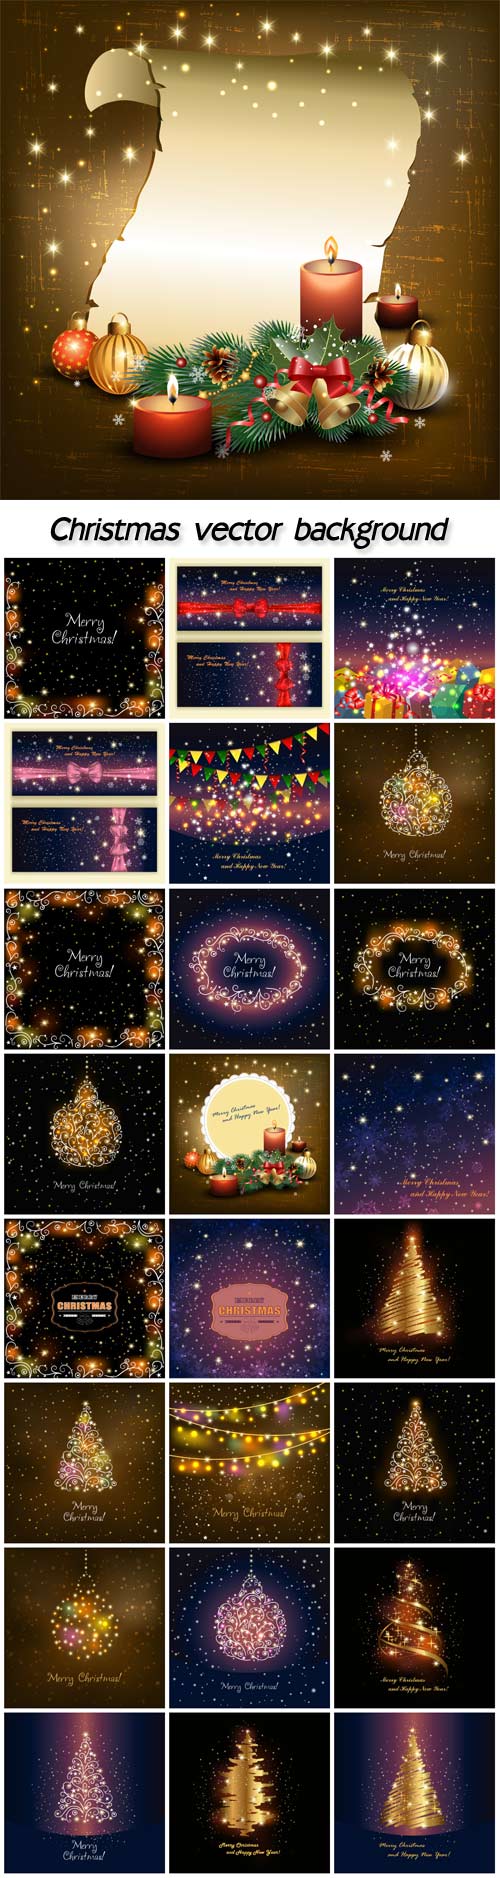 Christmas glowing background with gifts, shimmering bauble, shining tree